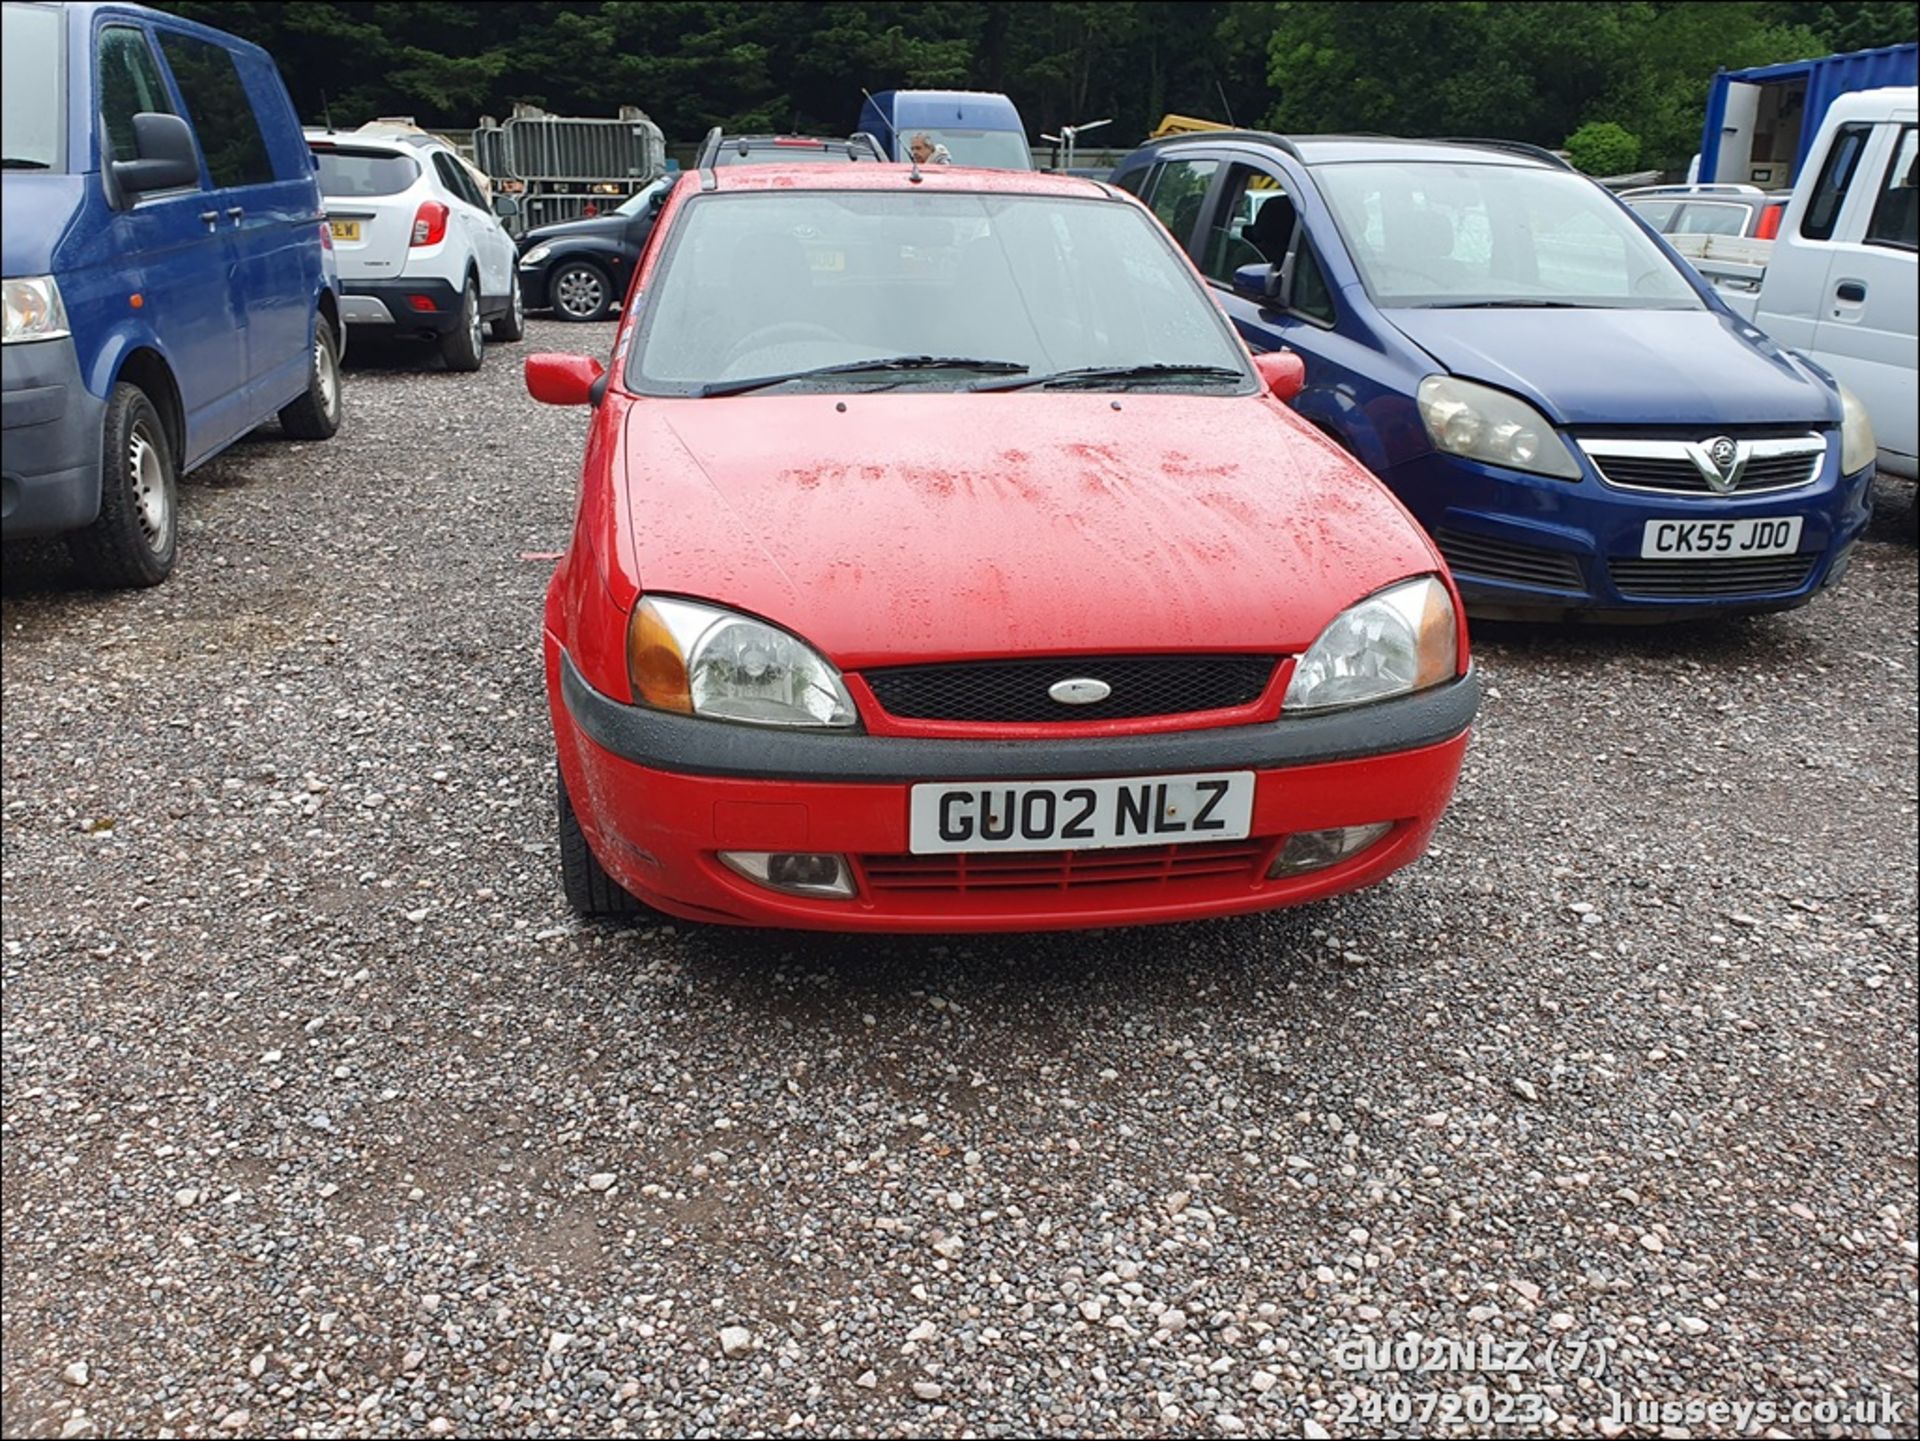 02/02 FORD FIESTA FREESTYLE - 1242cc 3dr Hatchback (Red) - Image 7 of 42